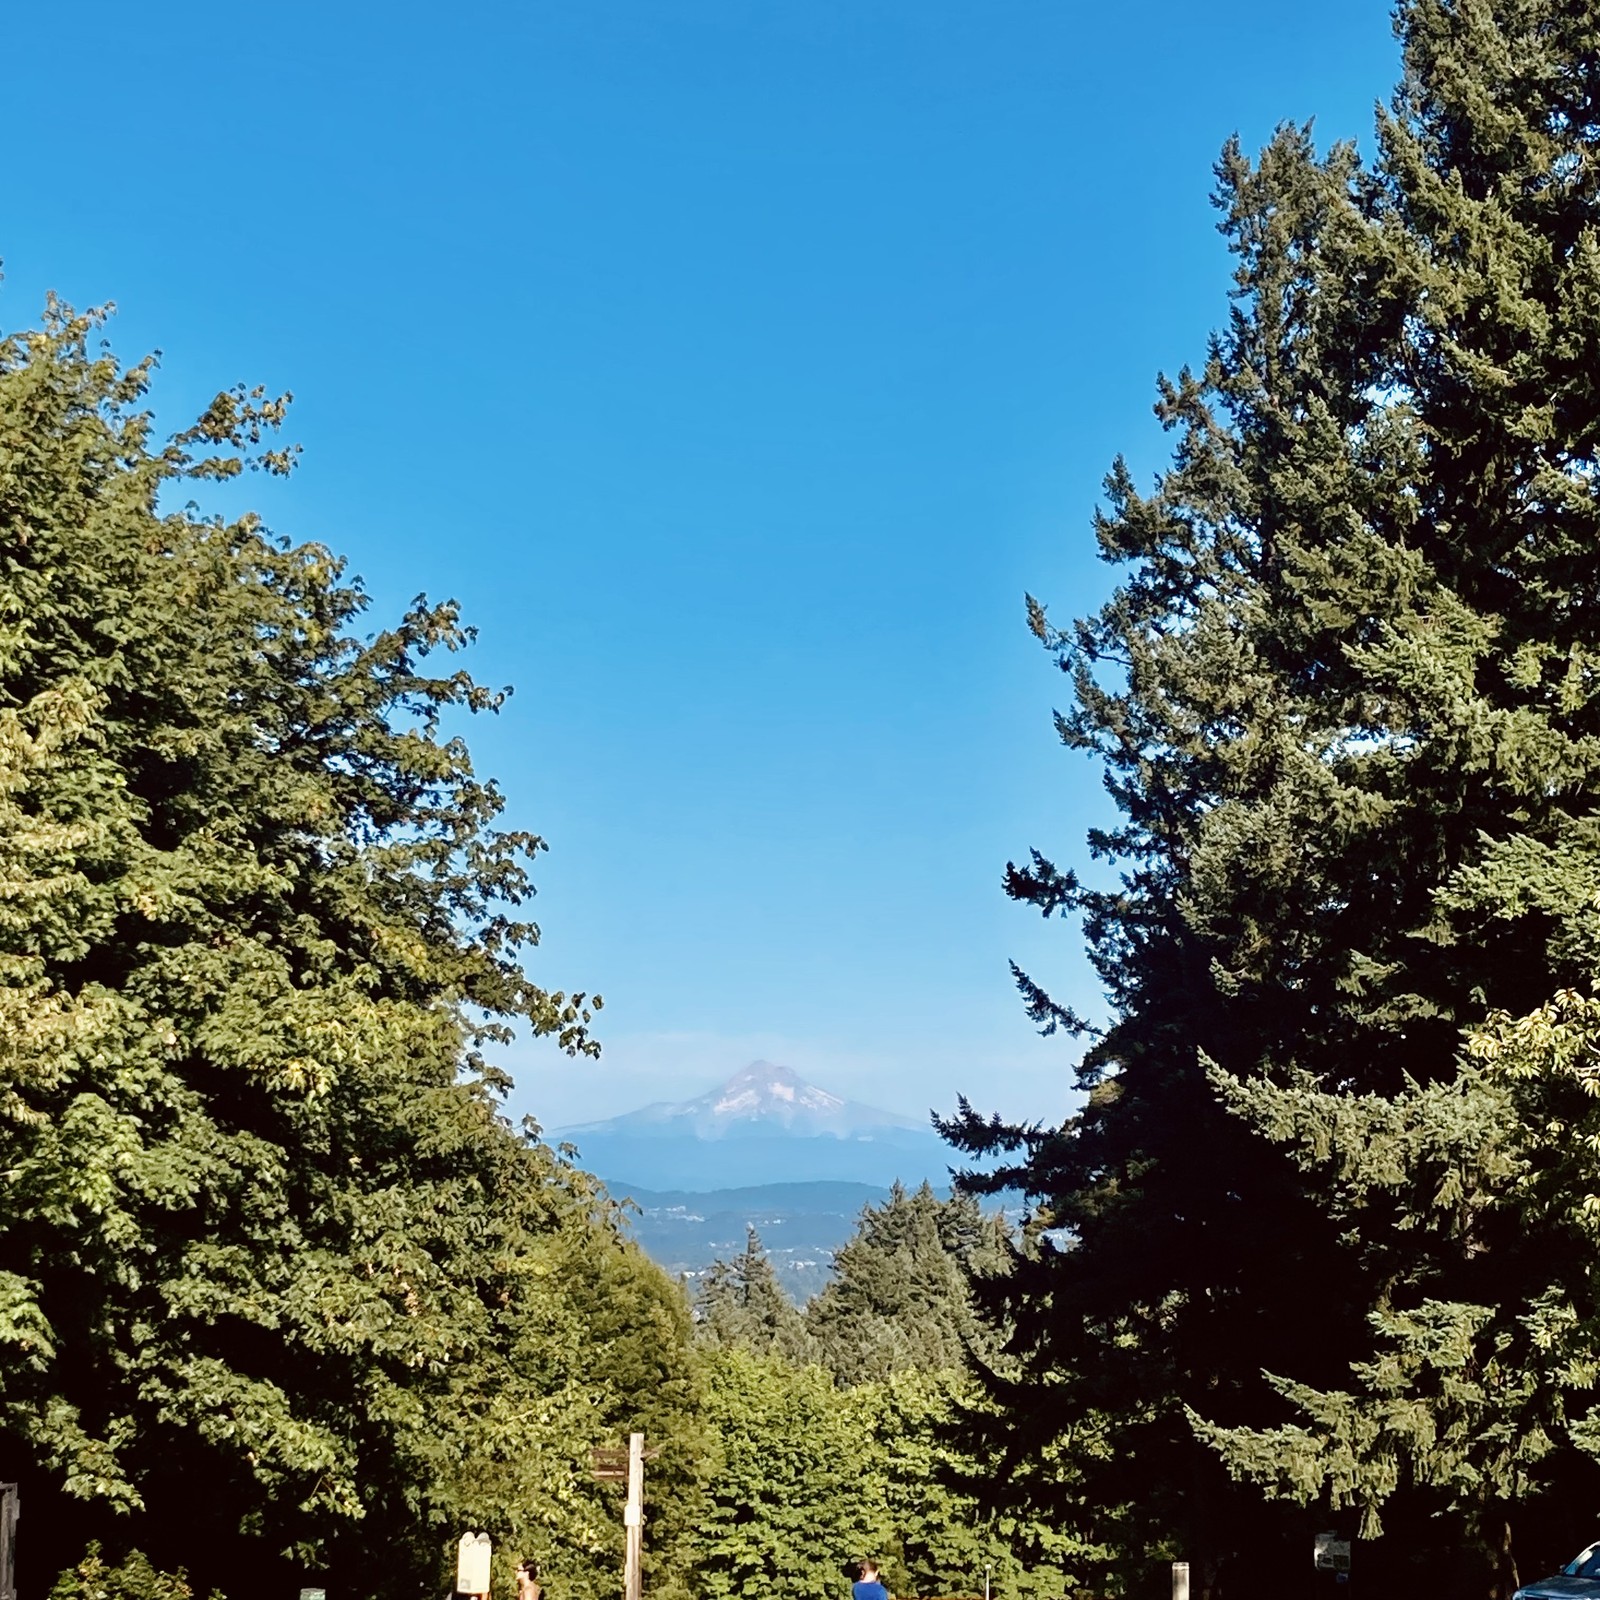 Mt. hood as seen from Council crest park in a clear midsummer afternoon